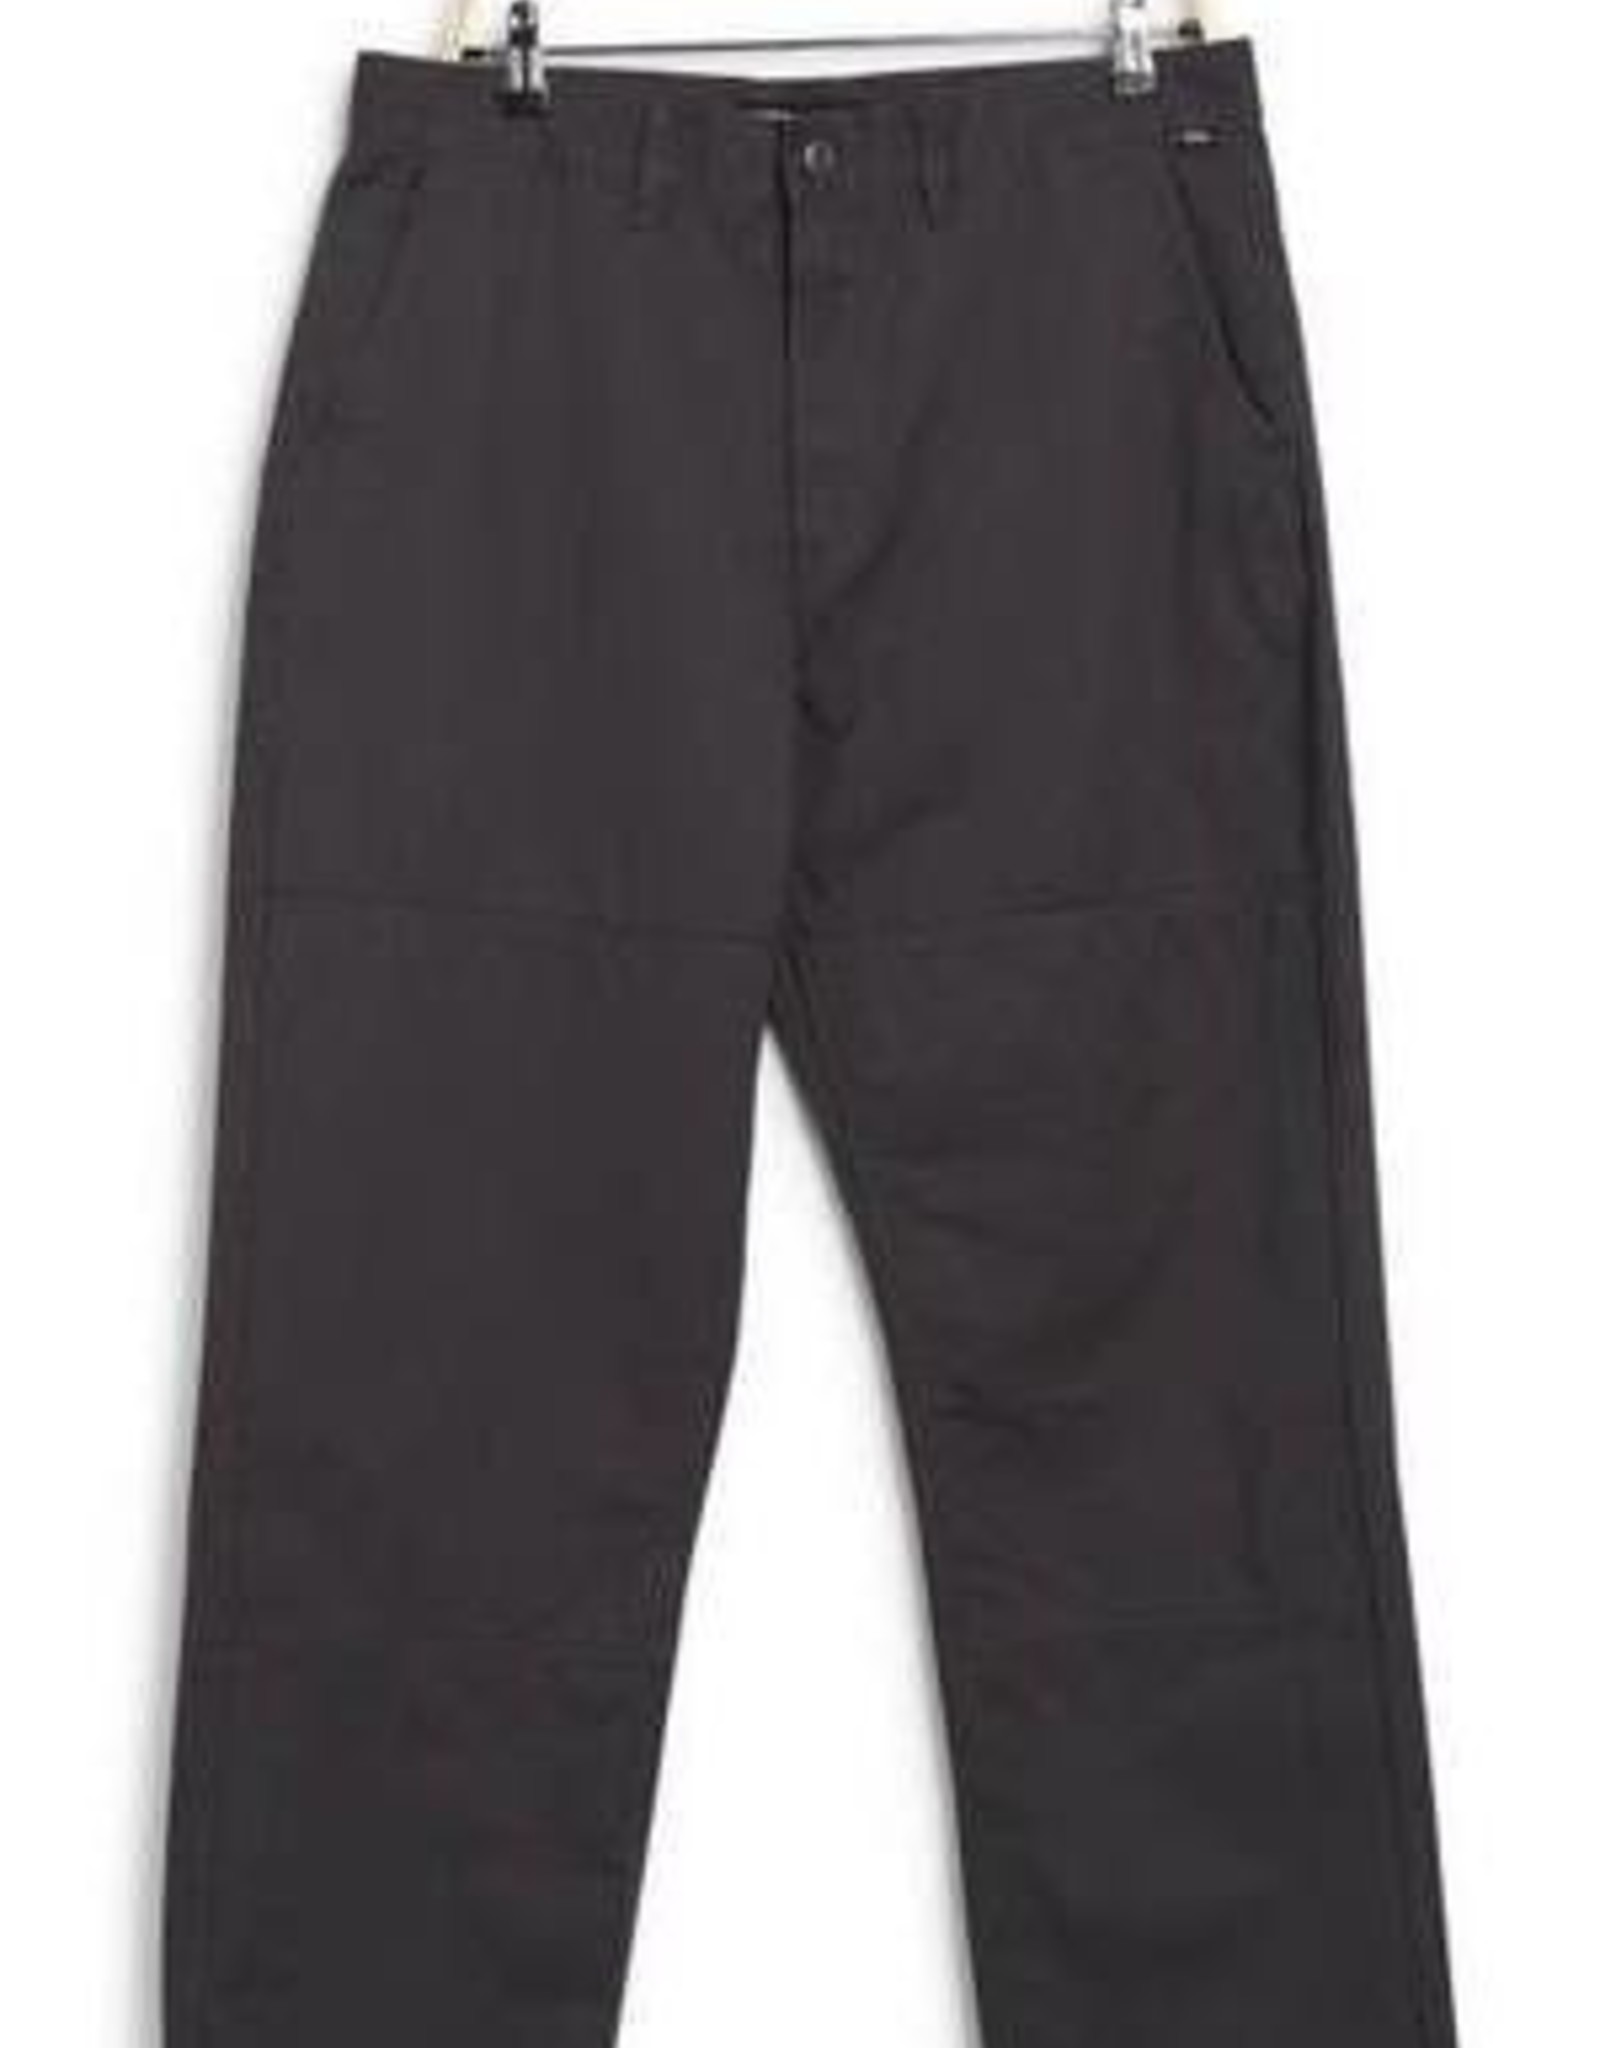 VANS VANS MN AUTHENTIC CHINO RELAXED PANT - STORMY